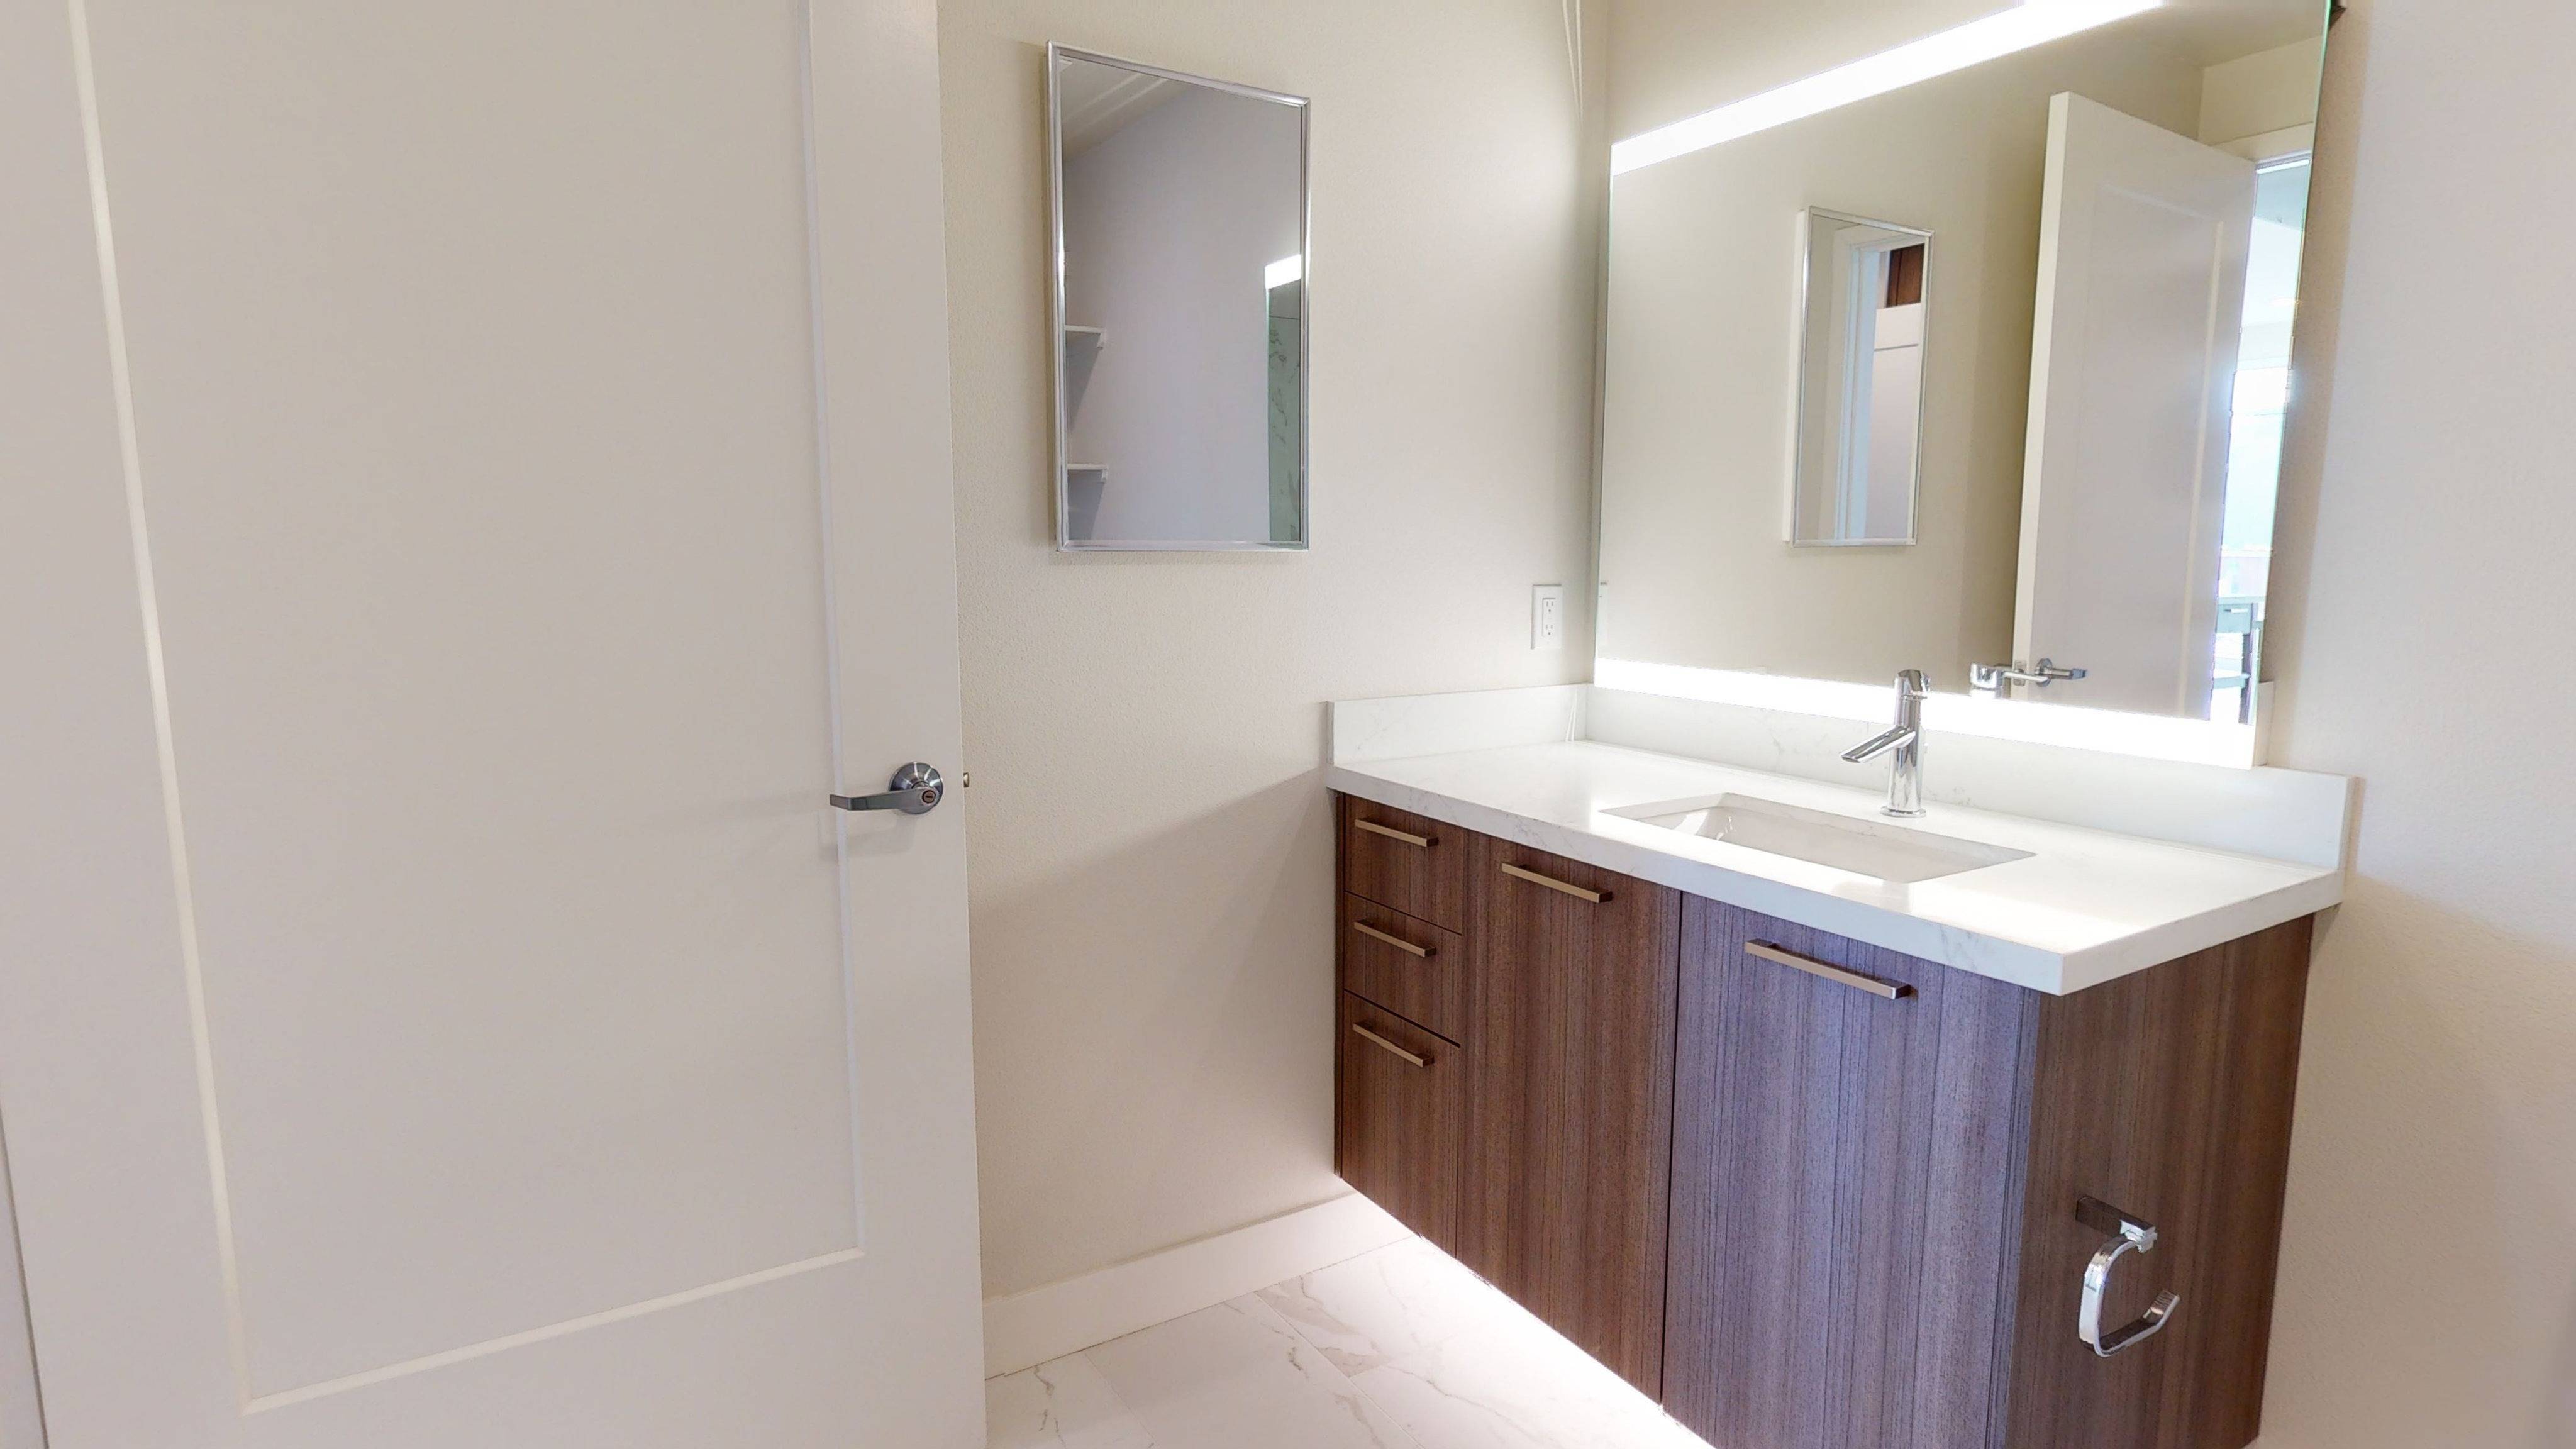 Floating vanity with under lighting and LED backlit vanities*